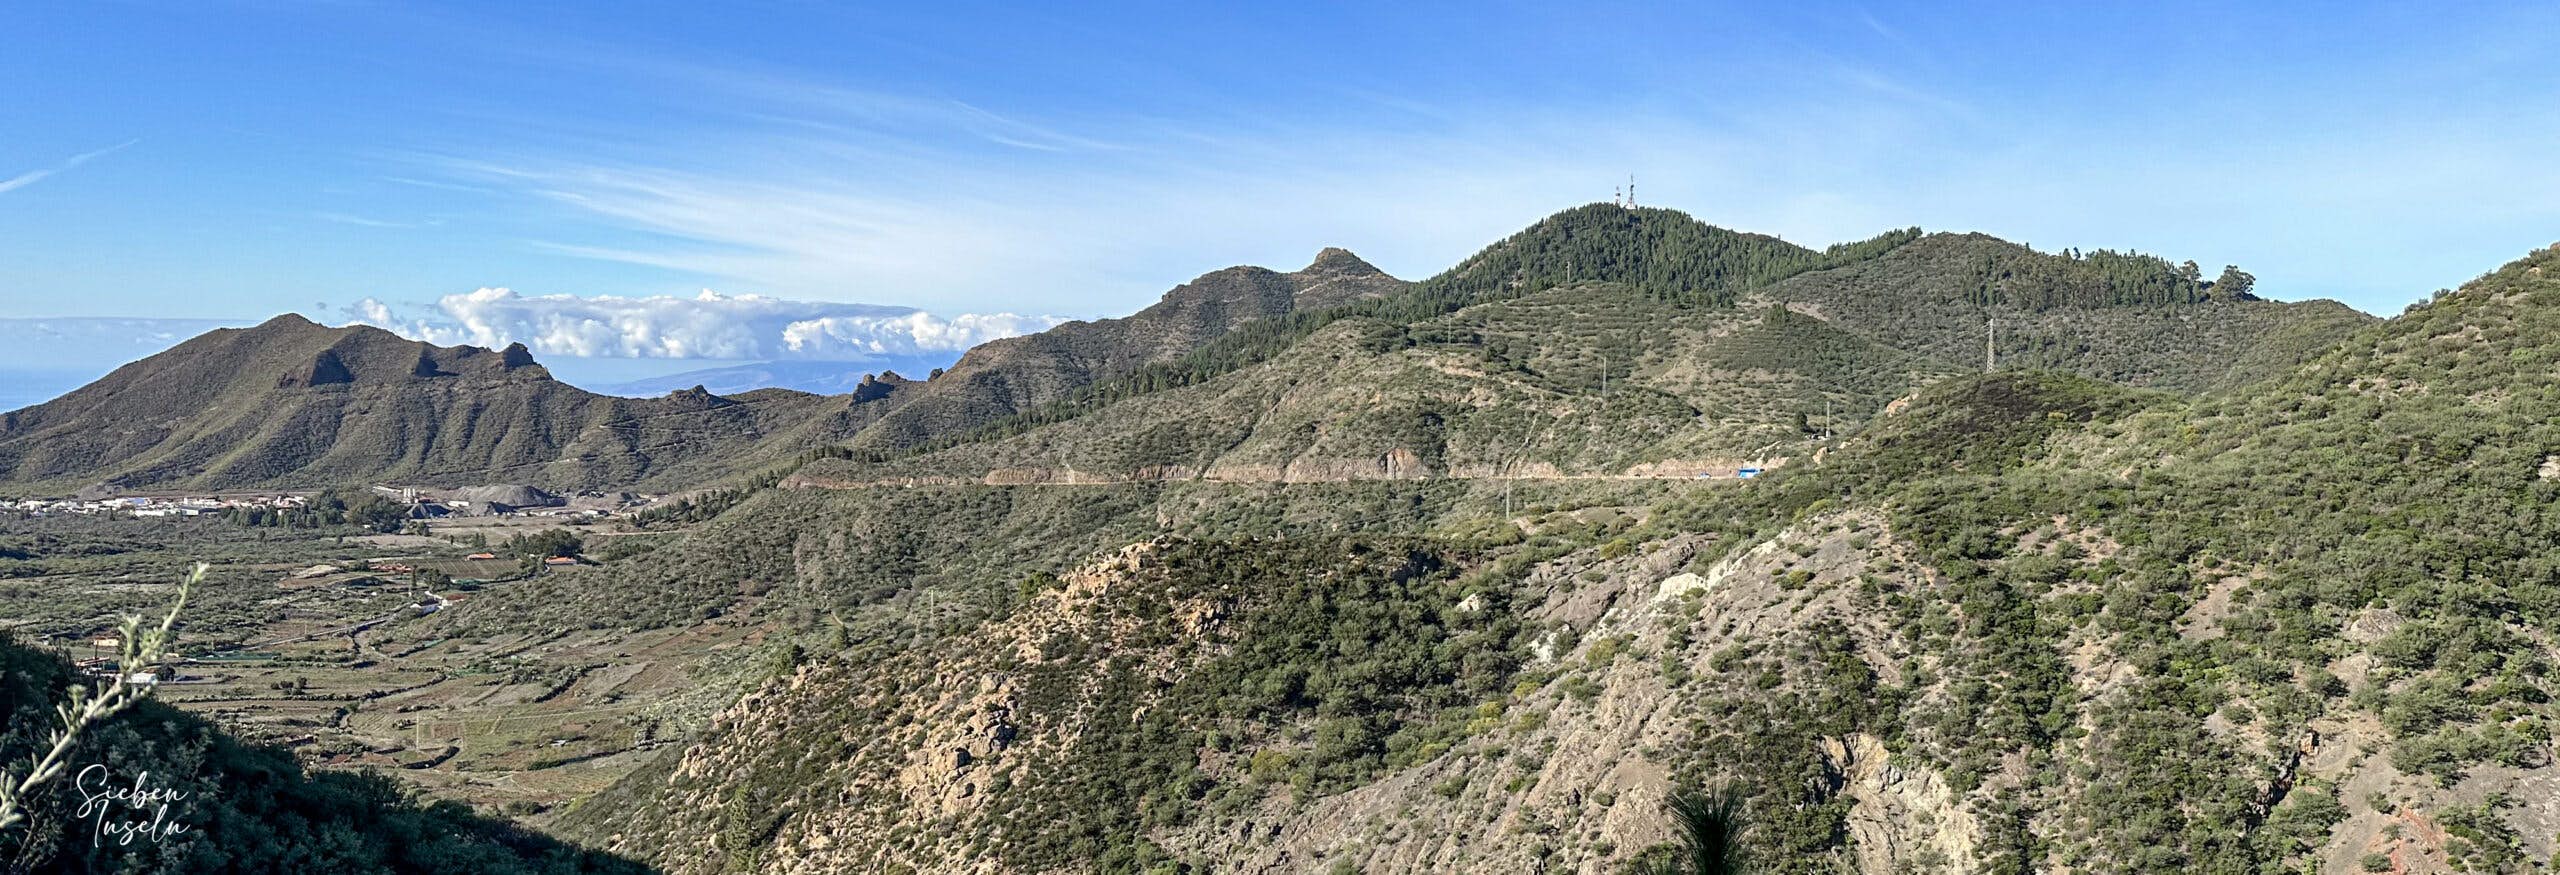 View from the hiking trail back towards Santiago del Teide and across the upper Santiago Valley